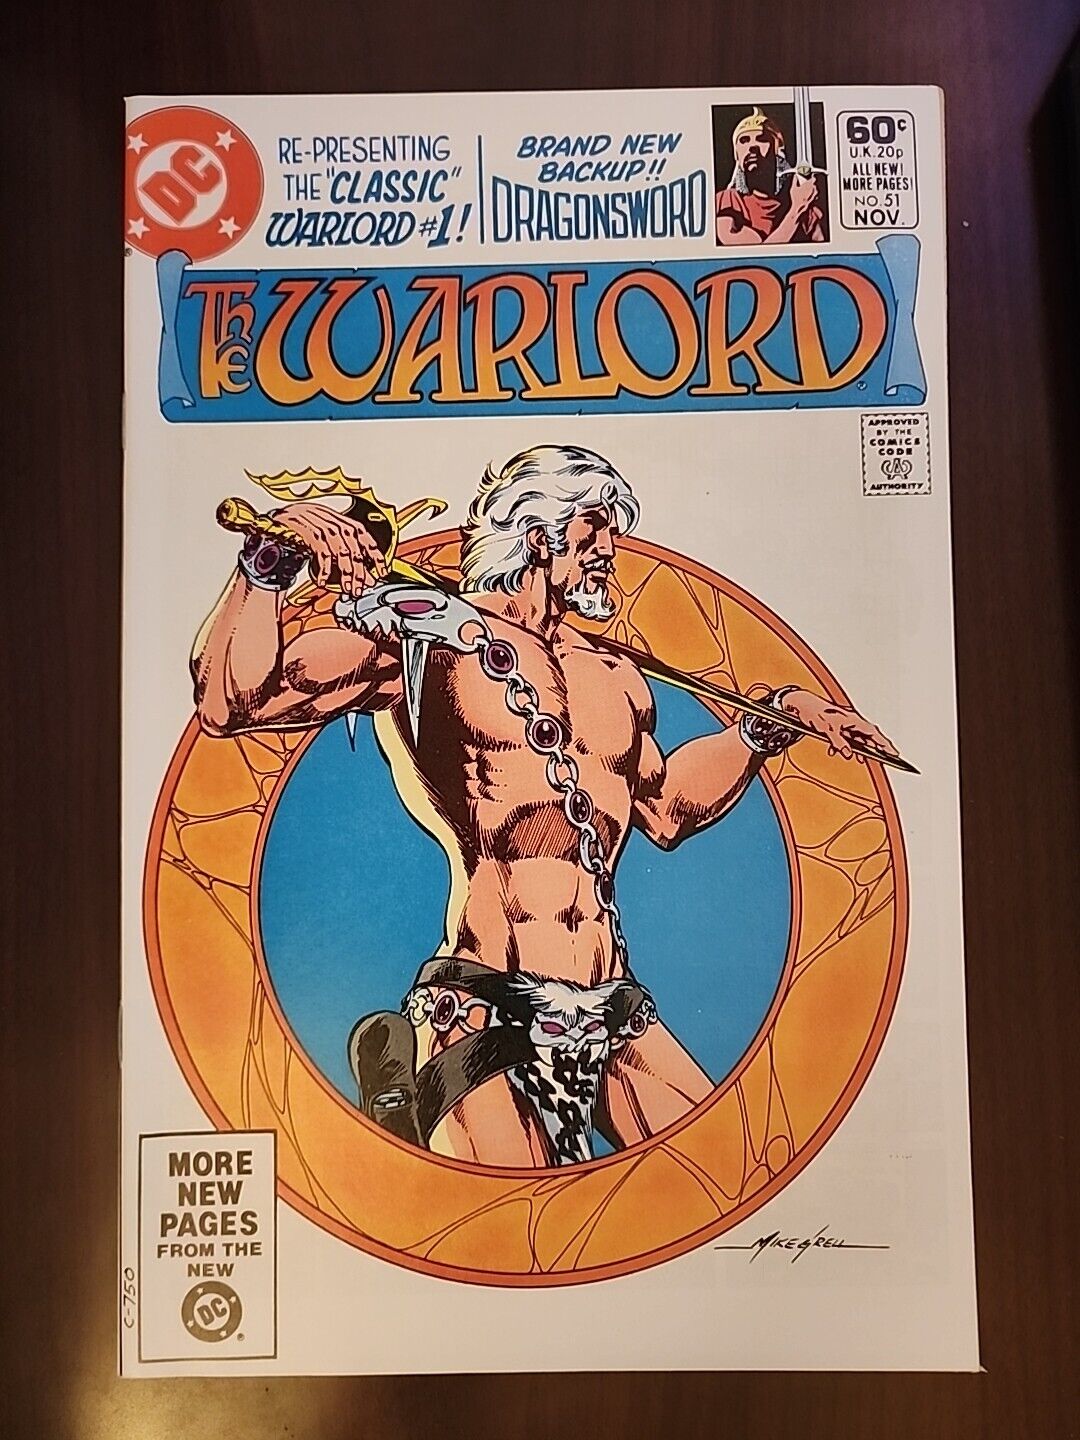 The Warlord - #51 - 1981 Bronze Age - VF/NM - Direct Edition - 